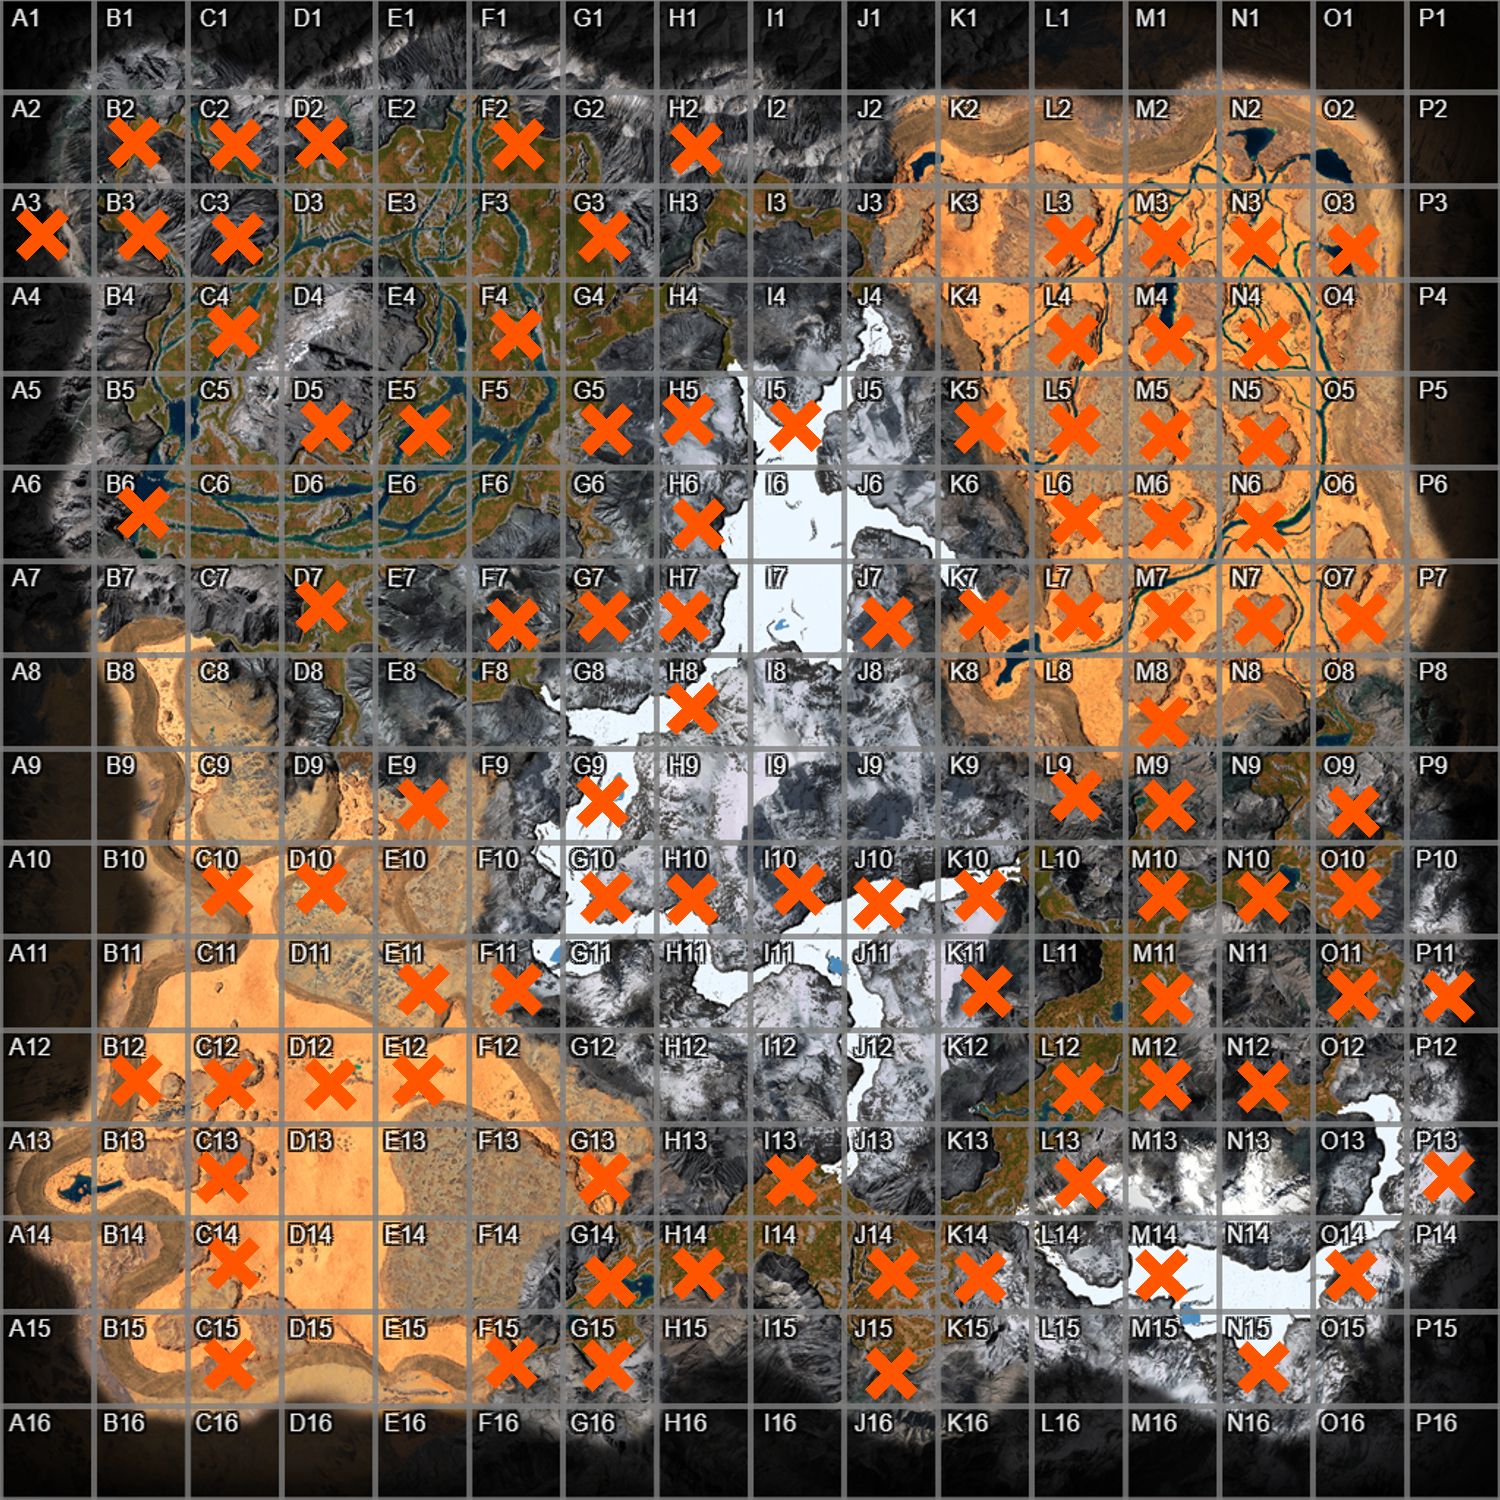 icarus map grid with markers indicating that a cave is present 